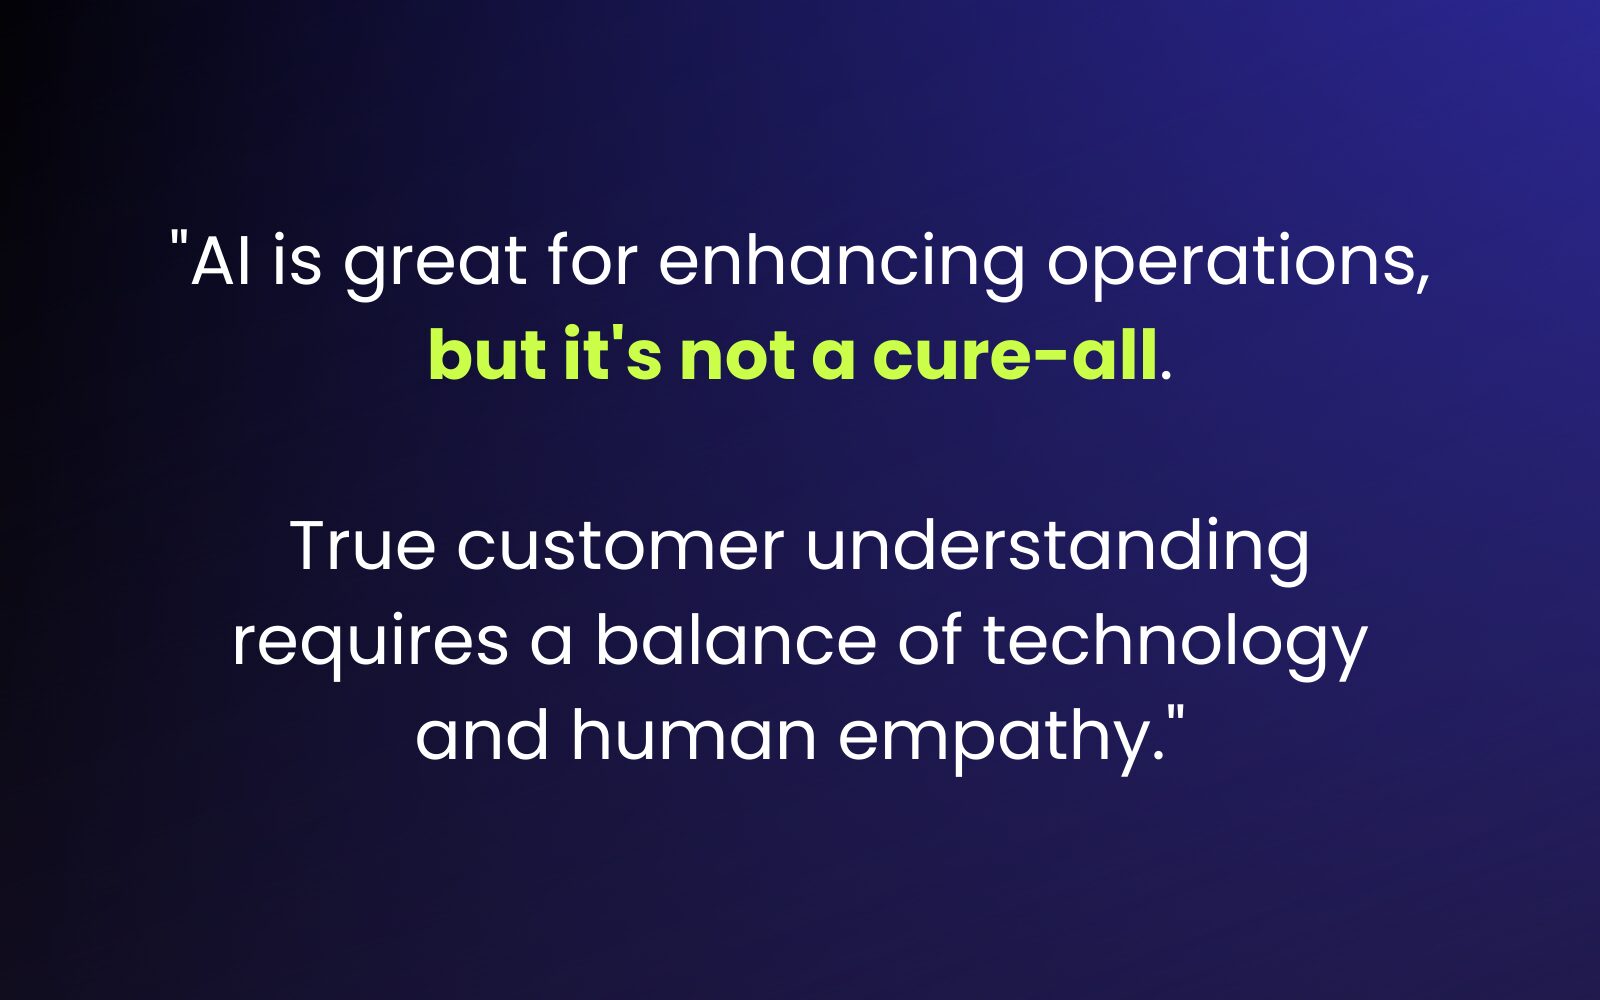  "AI is great for enhancing operations, but it's not a cure-all. True customer understanding requires a balance of technology and human empathy."